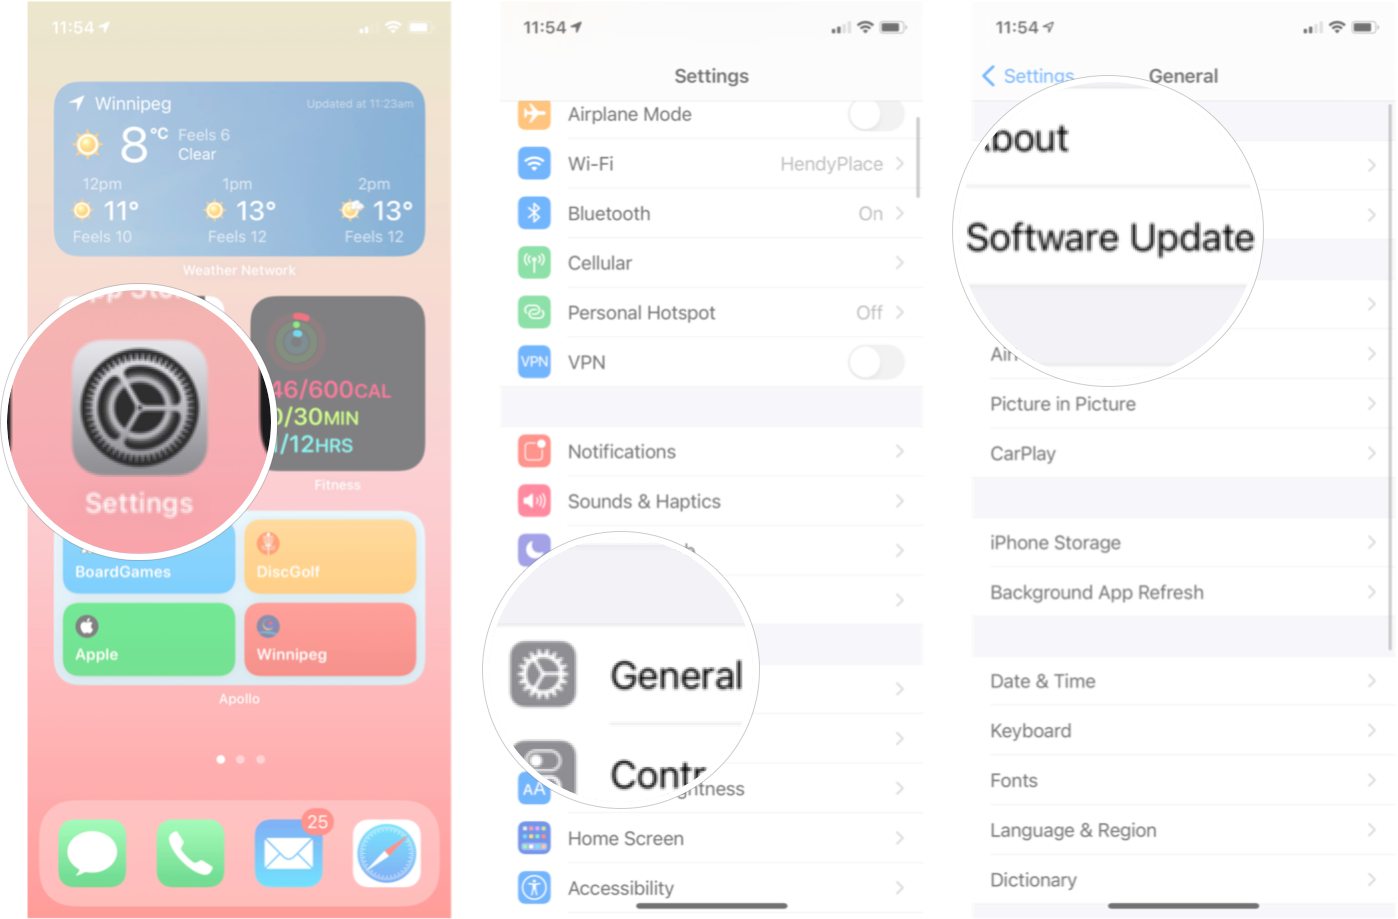 Check For Software Updates iOS 14: Launch Settings, tap General, and then tap Software Update